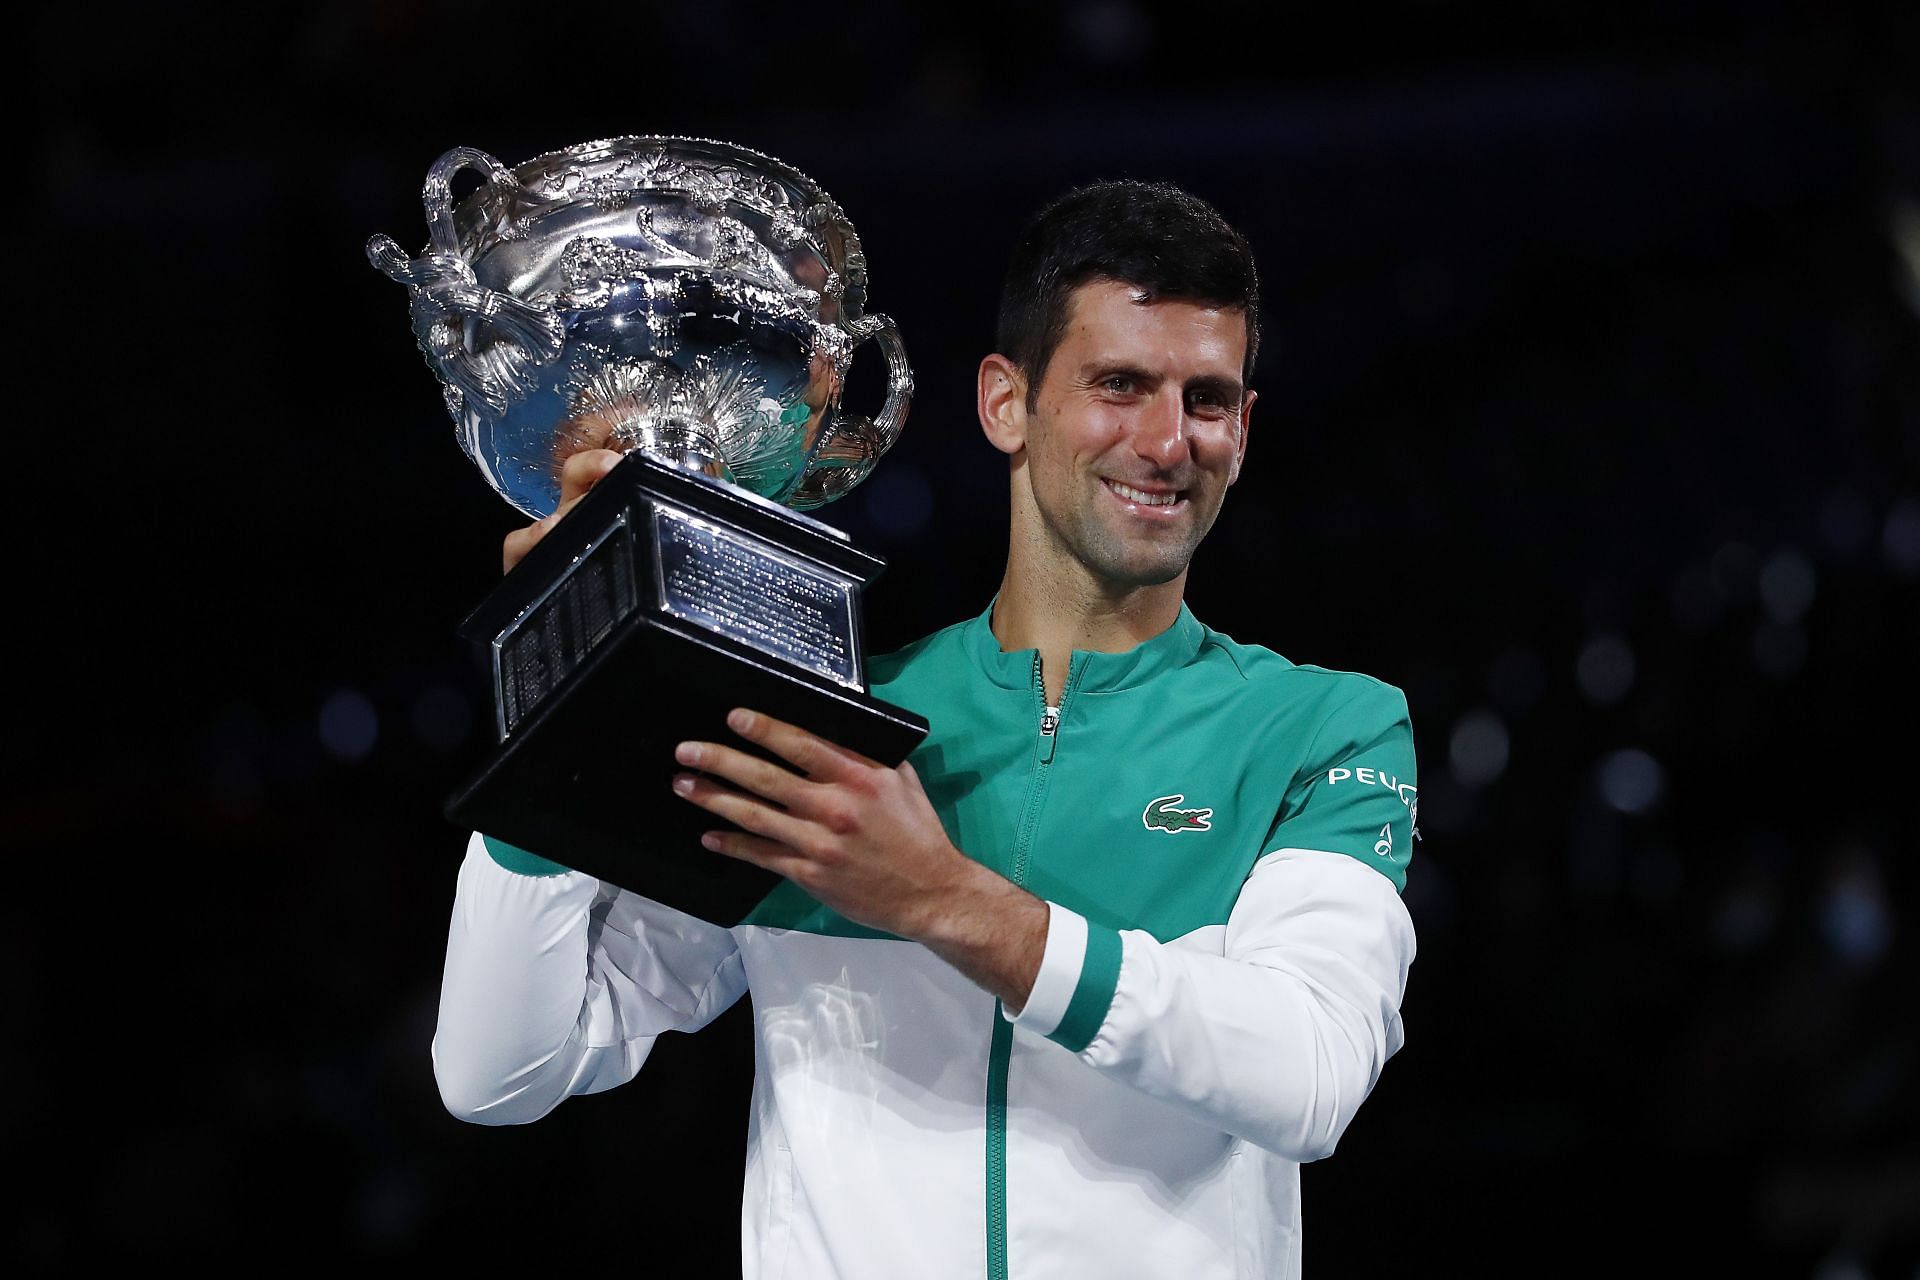 The Serbian former World No. 1 with the 2021 Australian Open trophy